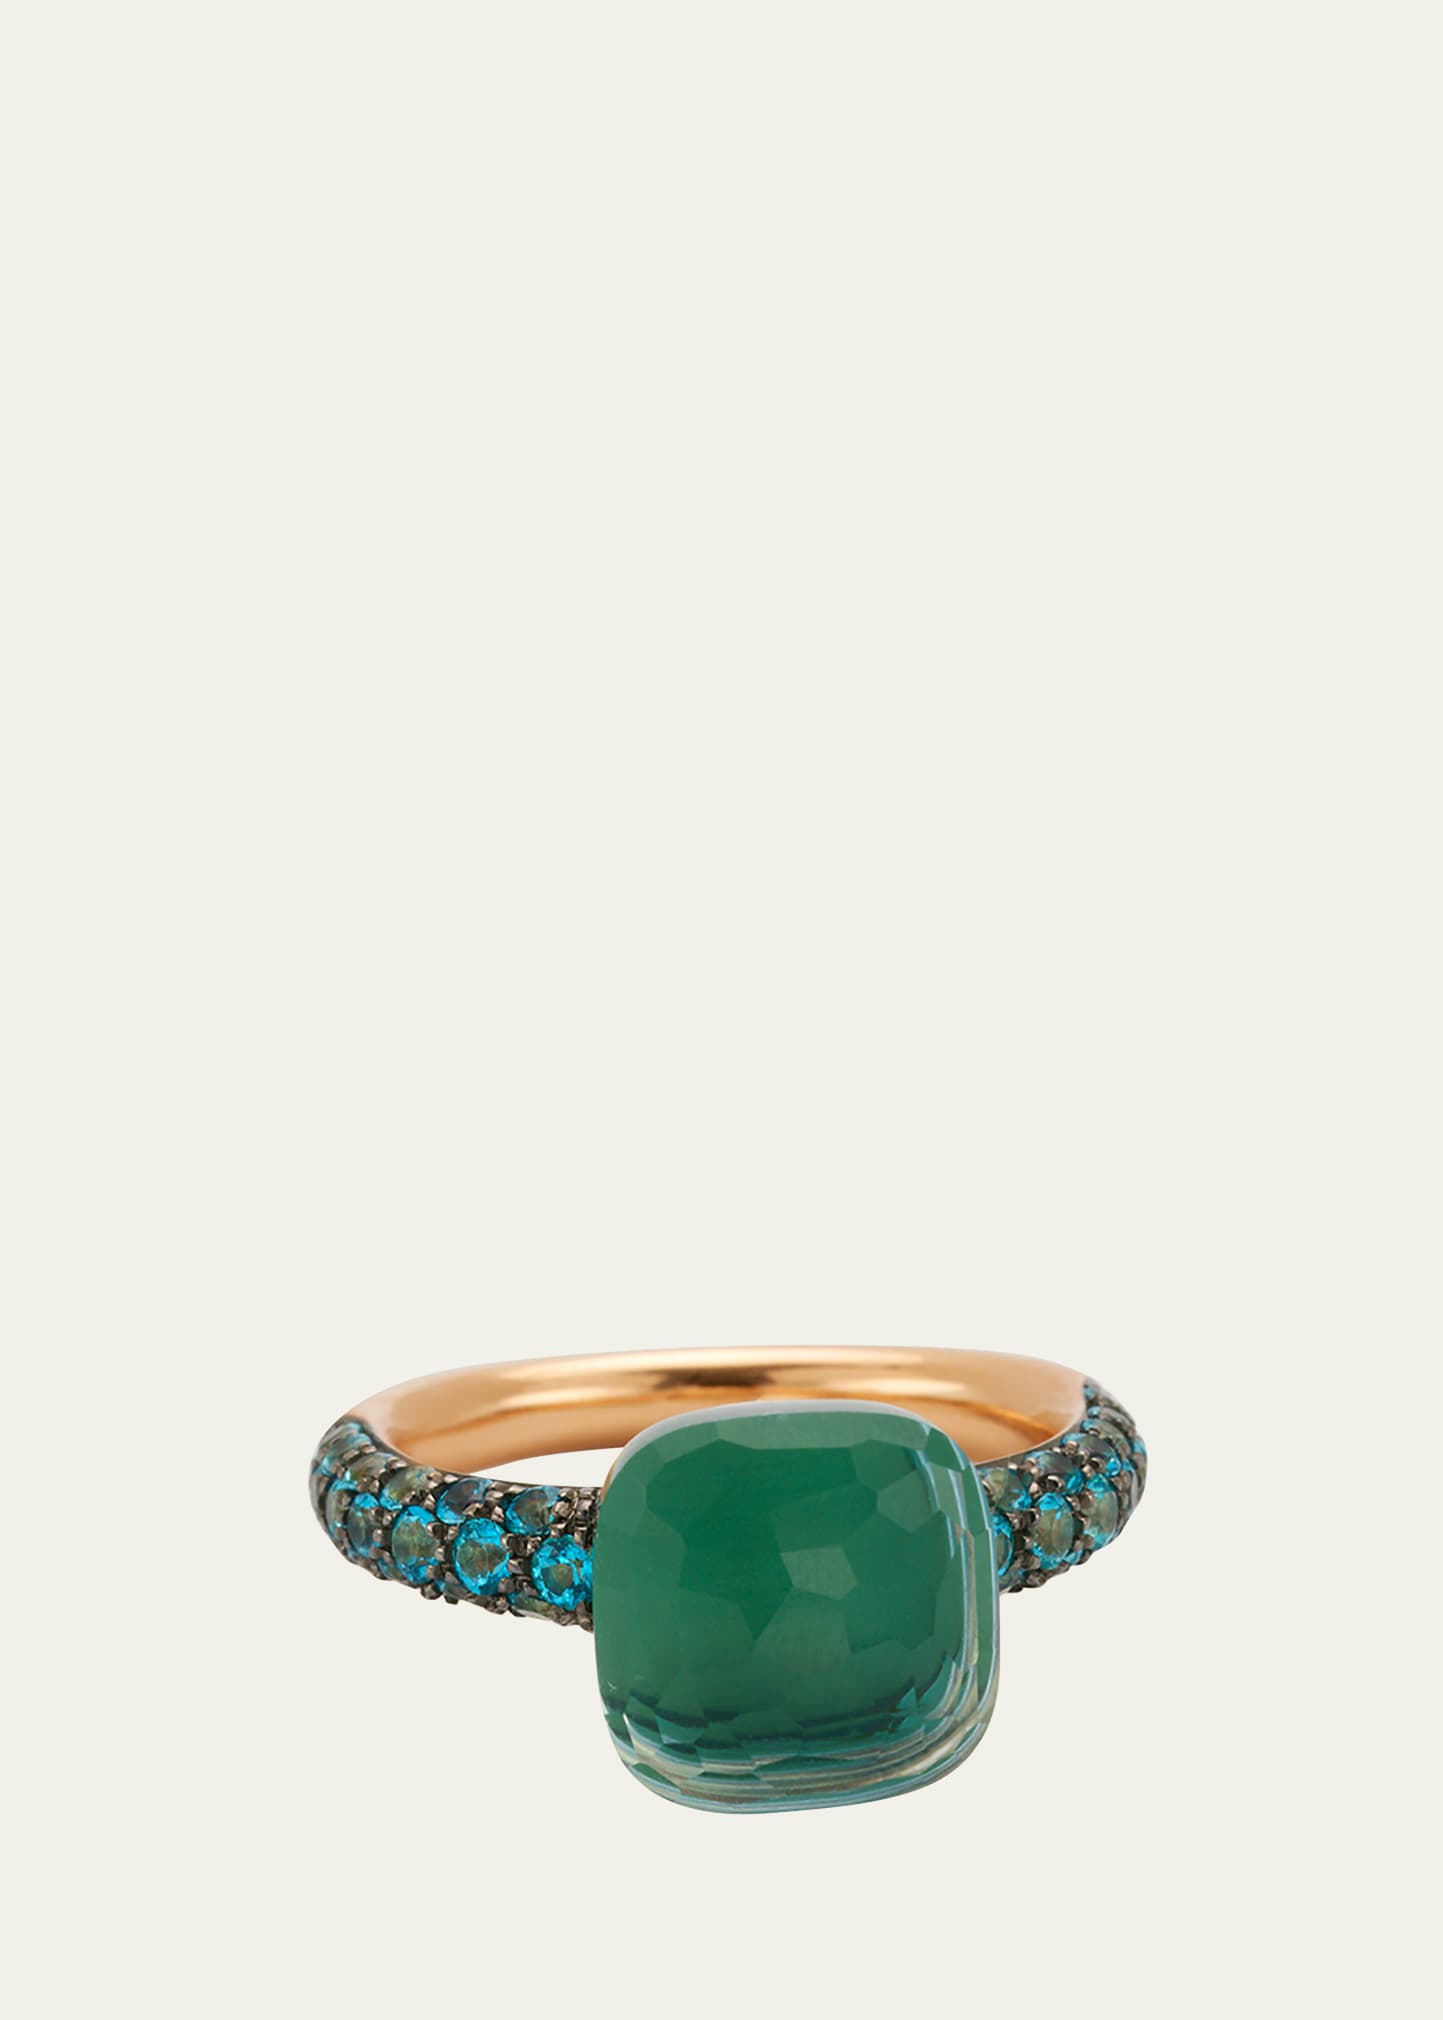 Nudo Classic 18k Gold Ring with Blue Topaz and Agate